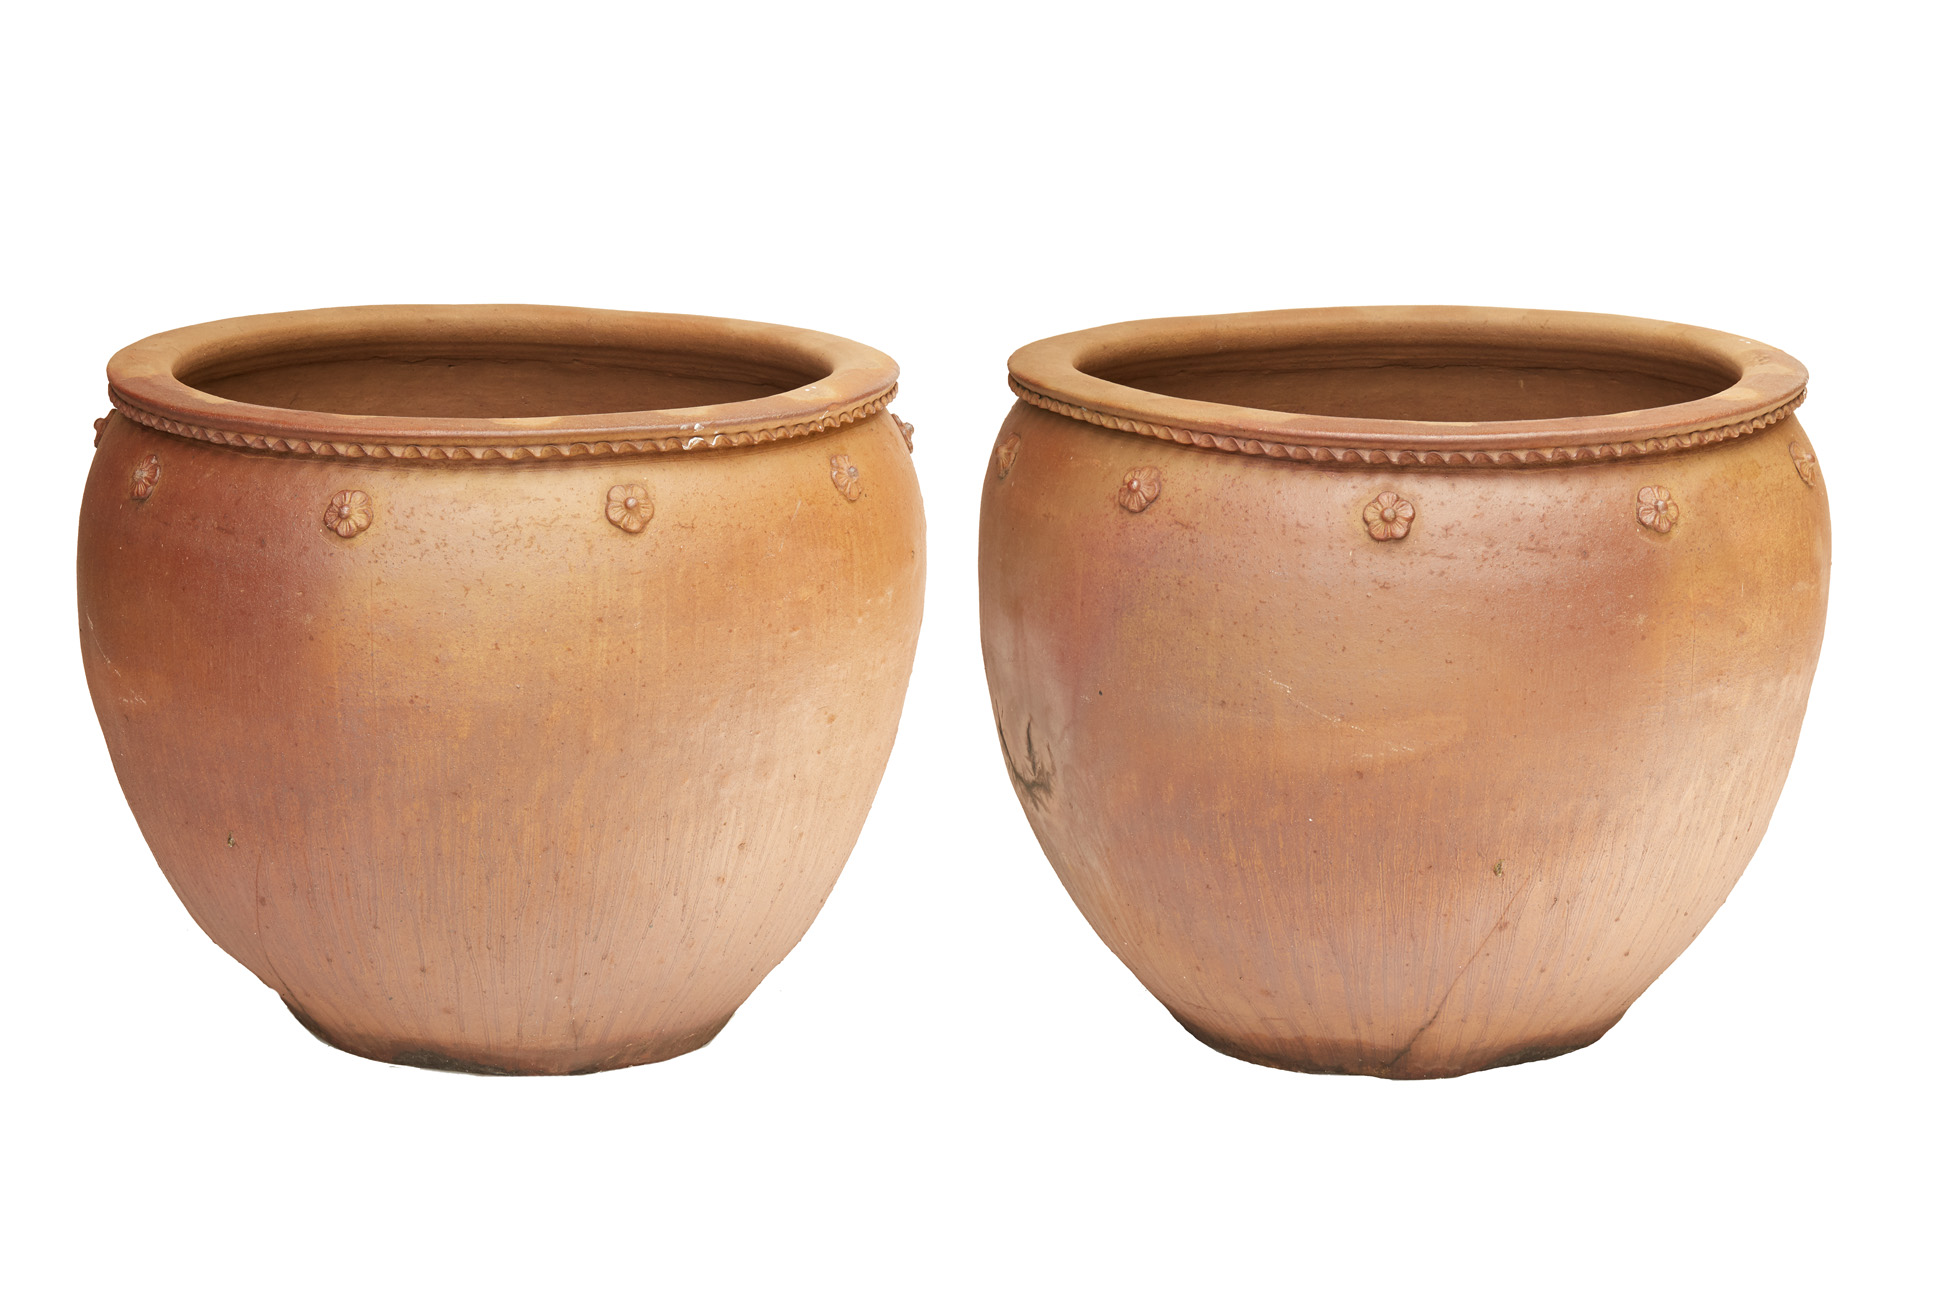 A PAIR OF LARGE TERRACOTTA POTS